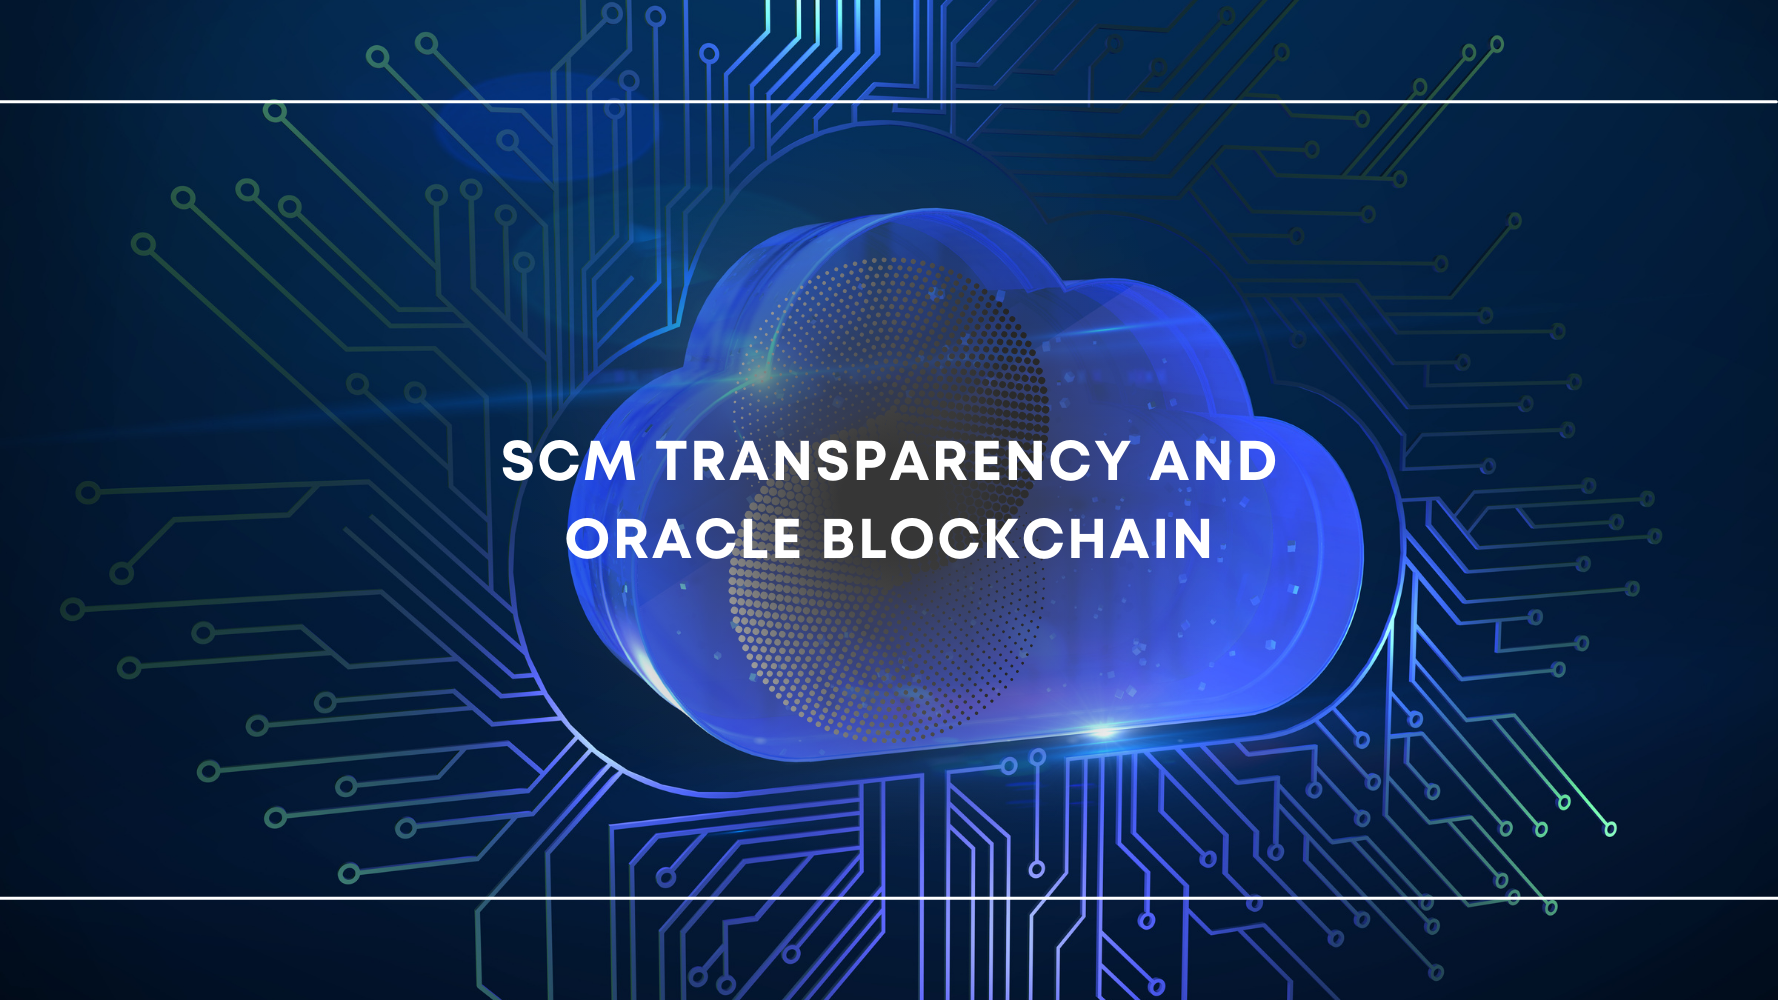 SCM Transparency and Oracle Blockchain